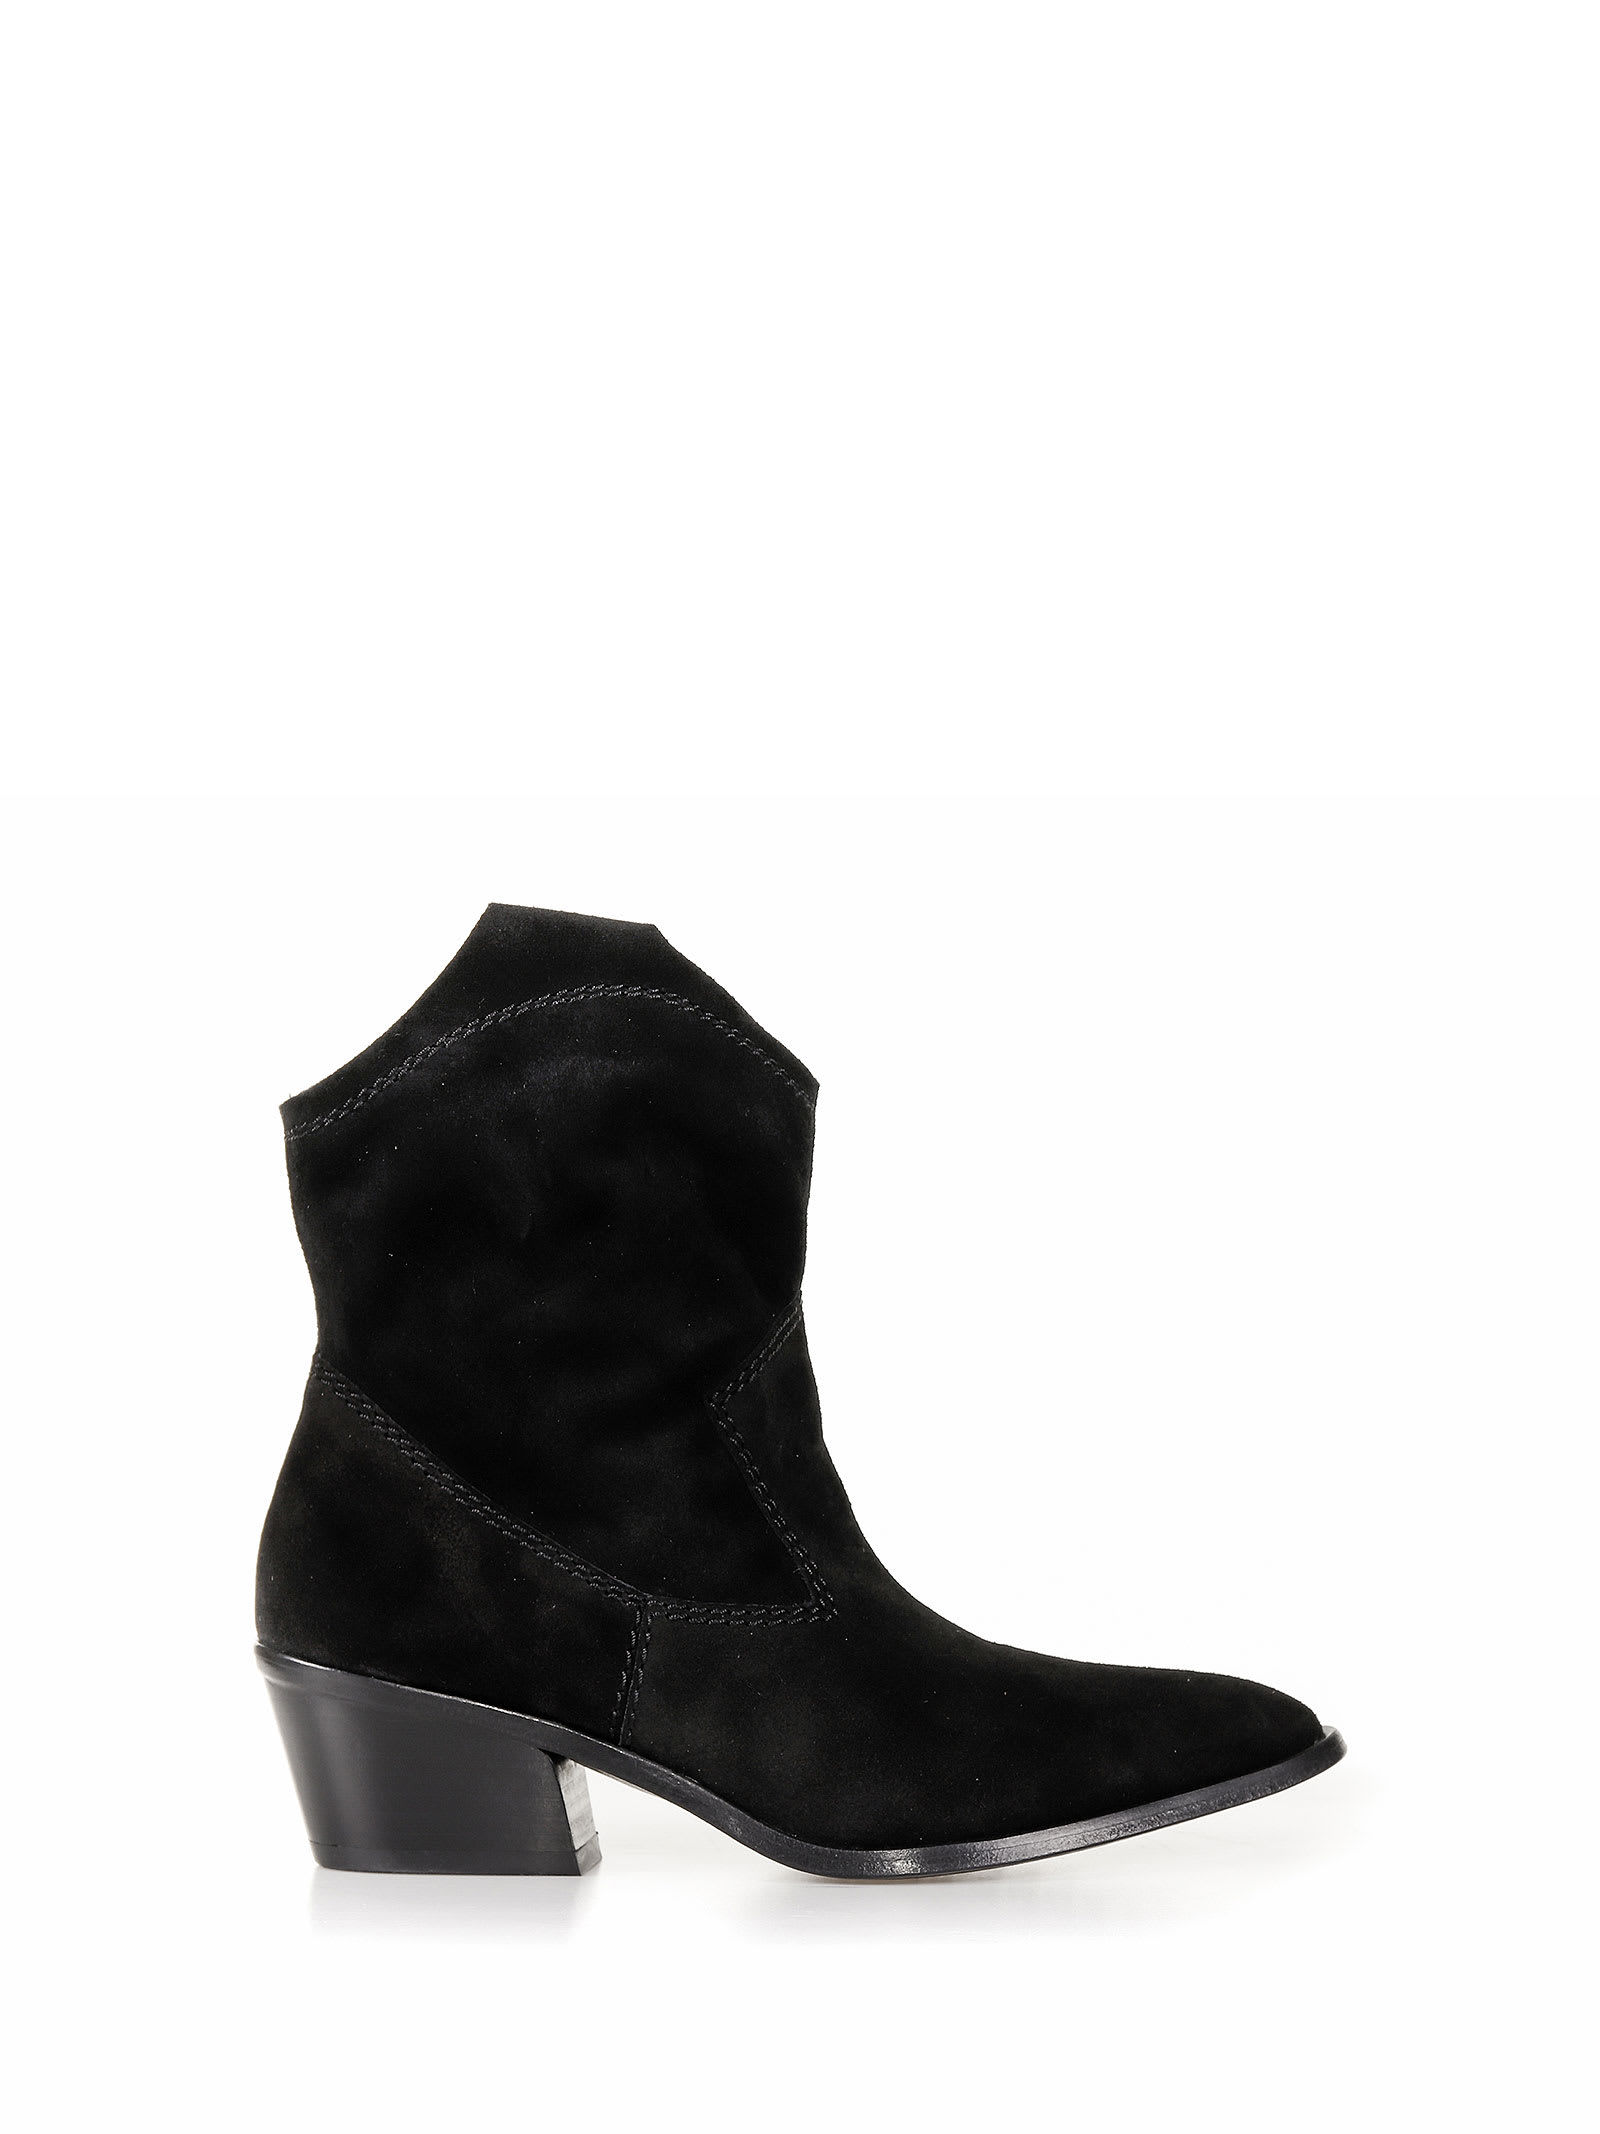 Pedro Garcia Suede Ankle Boot